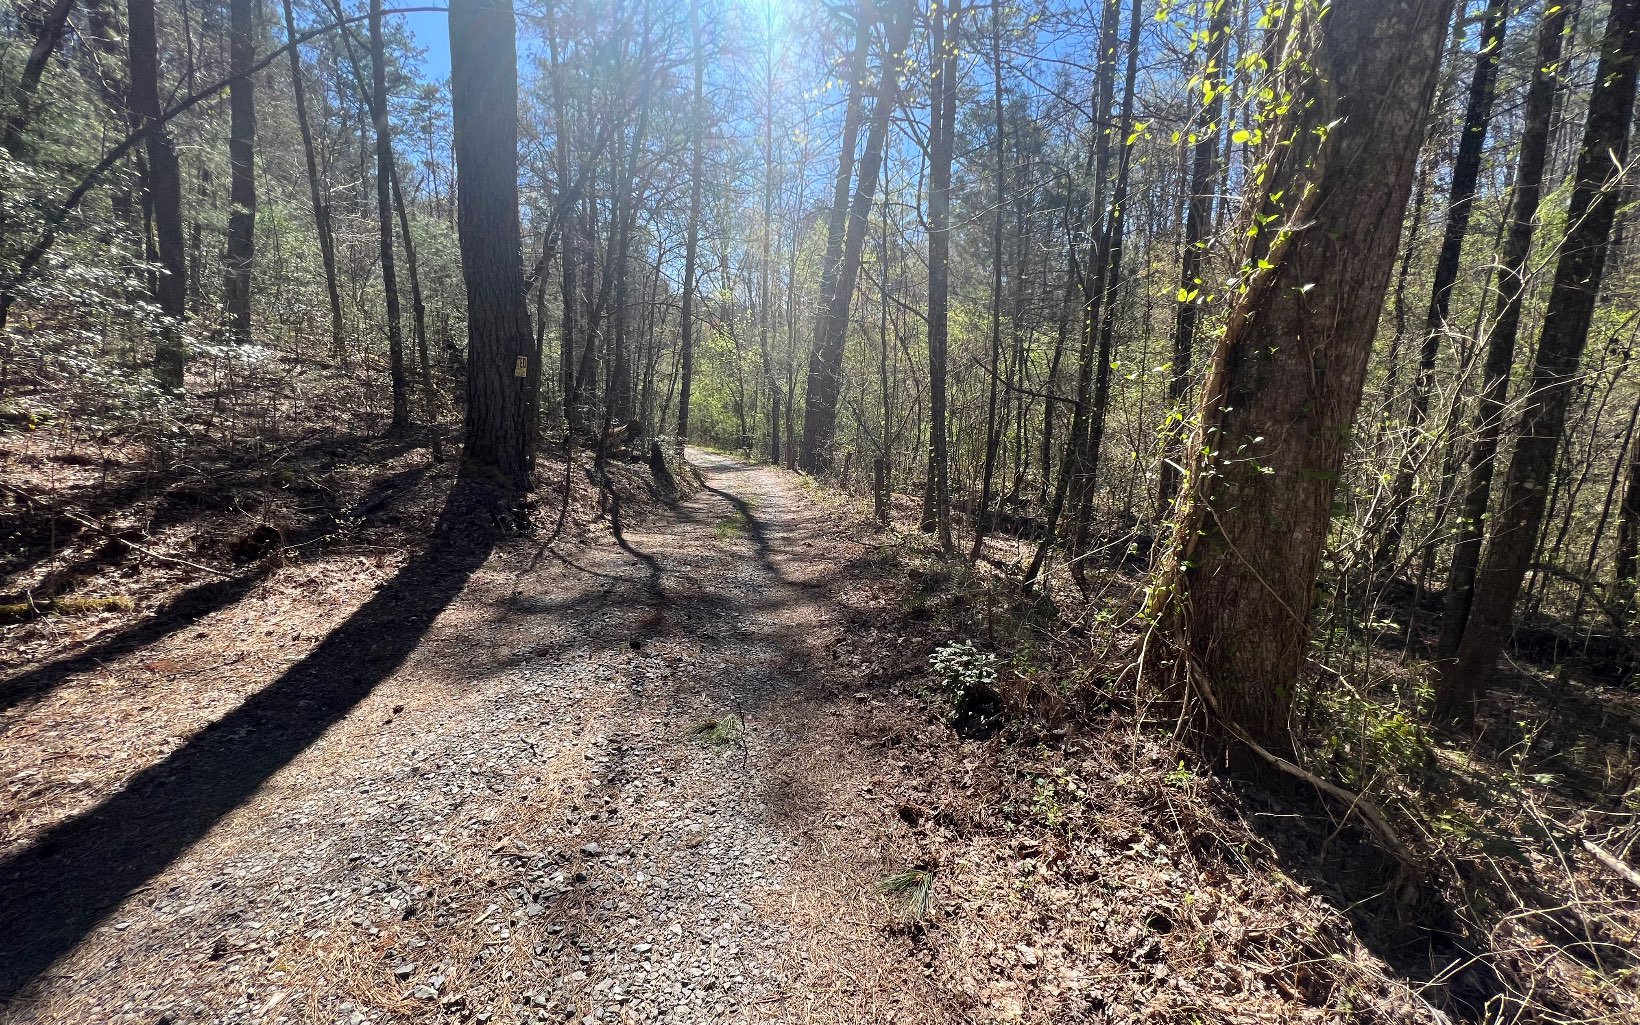 BEAUTIFUL NON RESTRICTED PRIVATE PROPERTY. GREAT FOR DEVELOPMENT OR A FAMILY RETREAT, LEVEL ENOUGH TO PUT MOBILE HOMES OR BUILD A DREAM HOME. ROAD INSTALLED BY SELLER GOES FROM FRONT TO THE END OF THE PROPERTY. WOULD BE EASY TO DEVELOP.